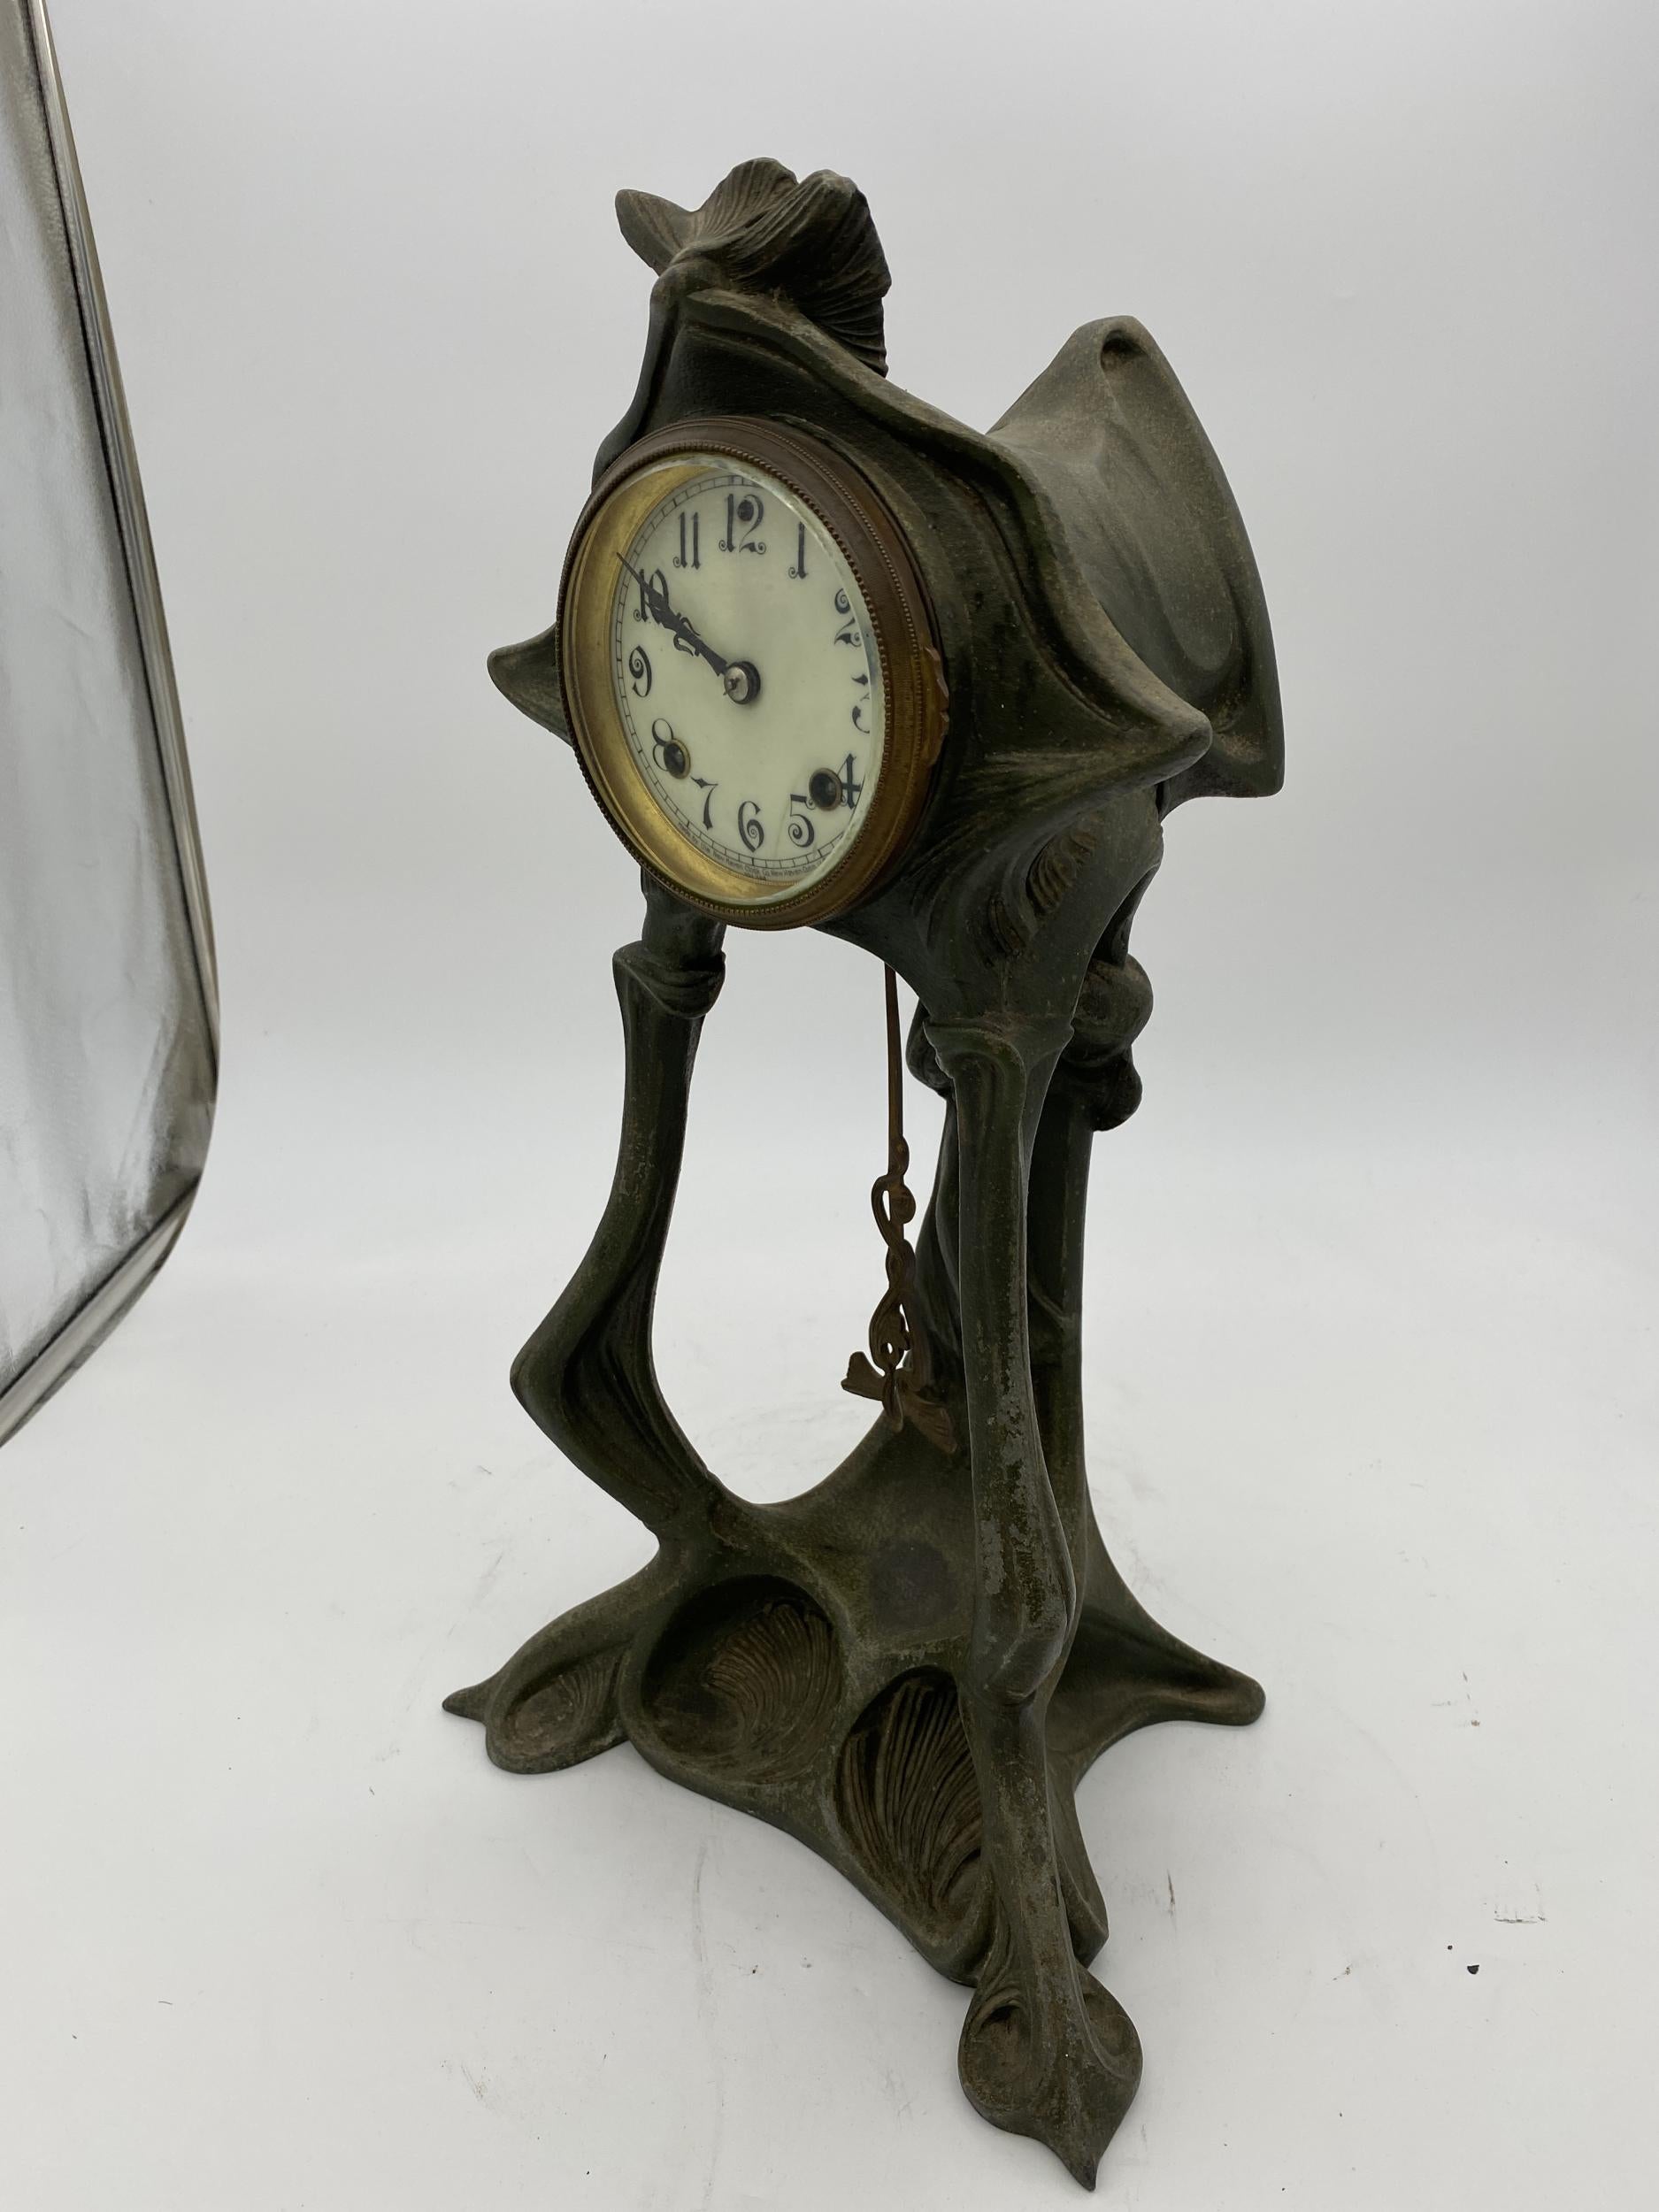 Art Nouveau boudoir clock by New Haven Clock Co. features iron cast foliate and floral form frame, porcelain face with Arabic numbers and protected by bevelled crystal, in working condition and with key, early 20th century.

Measures: 12